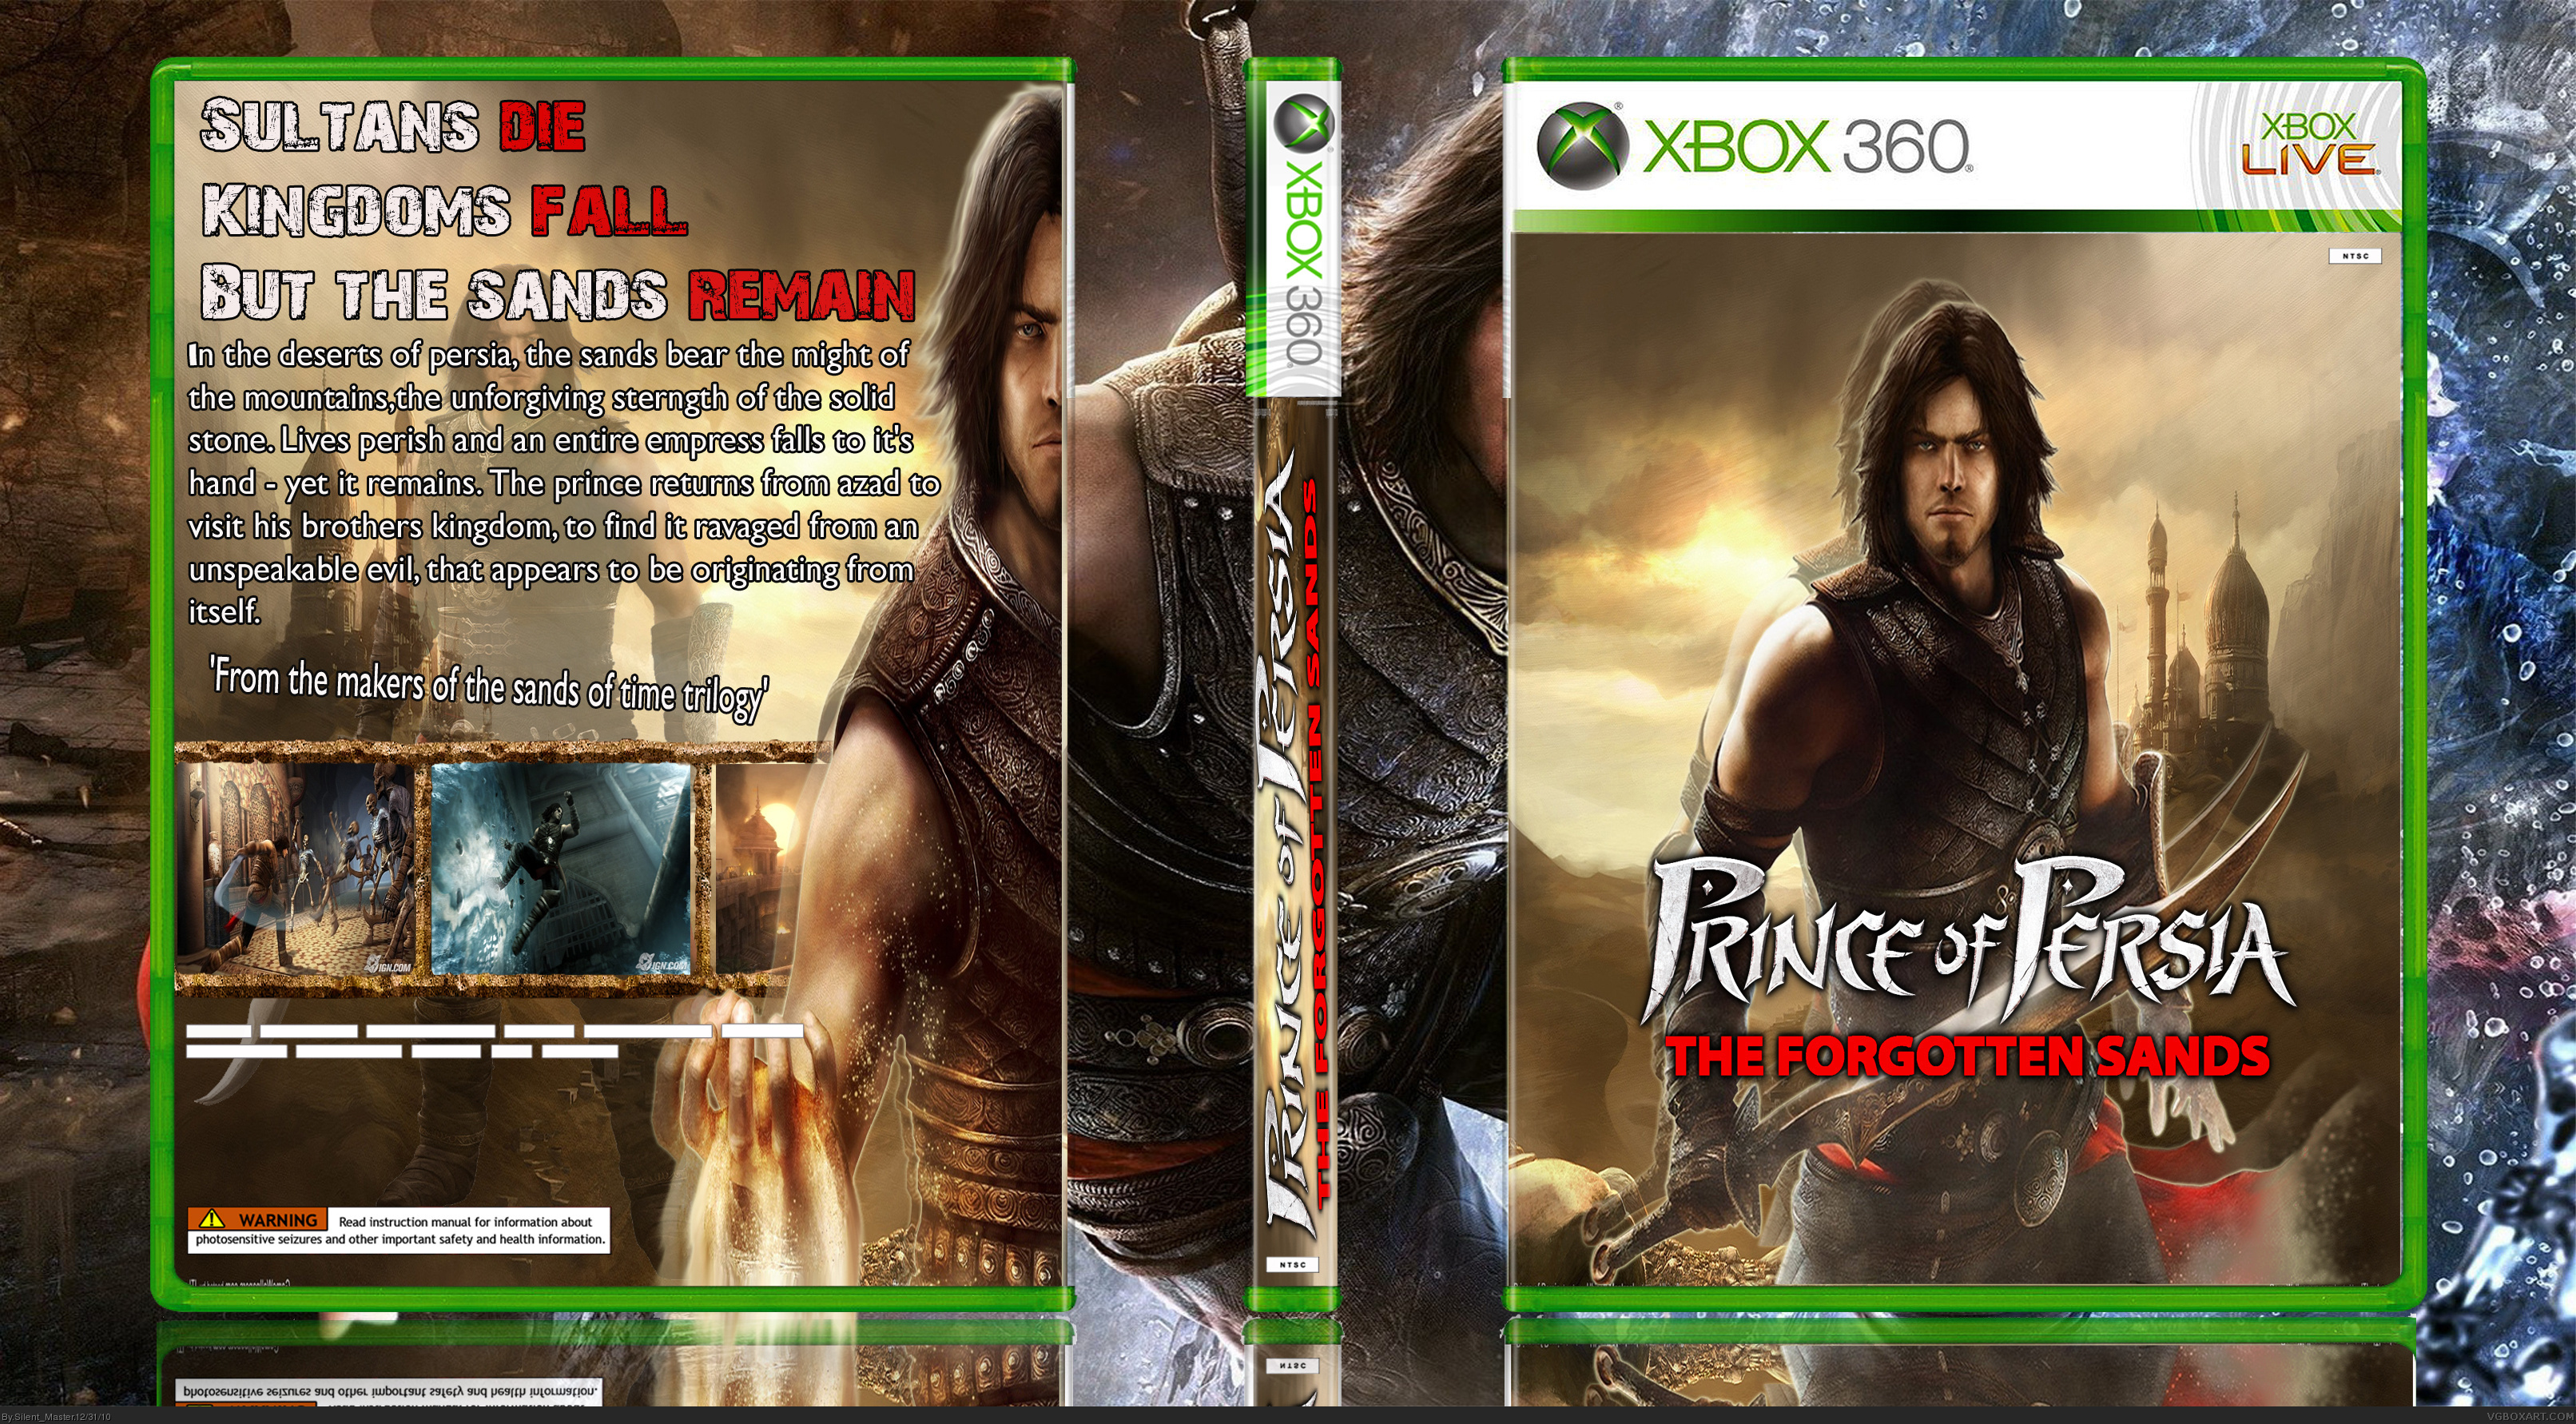 prince-of-persia-the-forgotten-sands-xbox-360-box-art-cover-by-silent-master